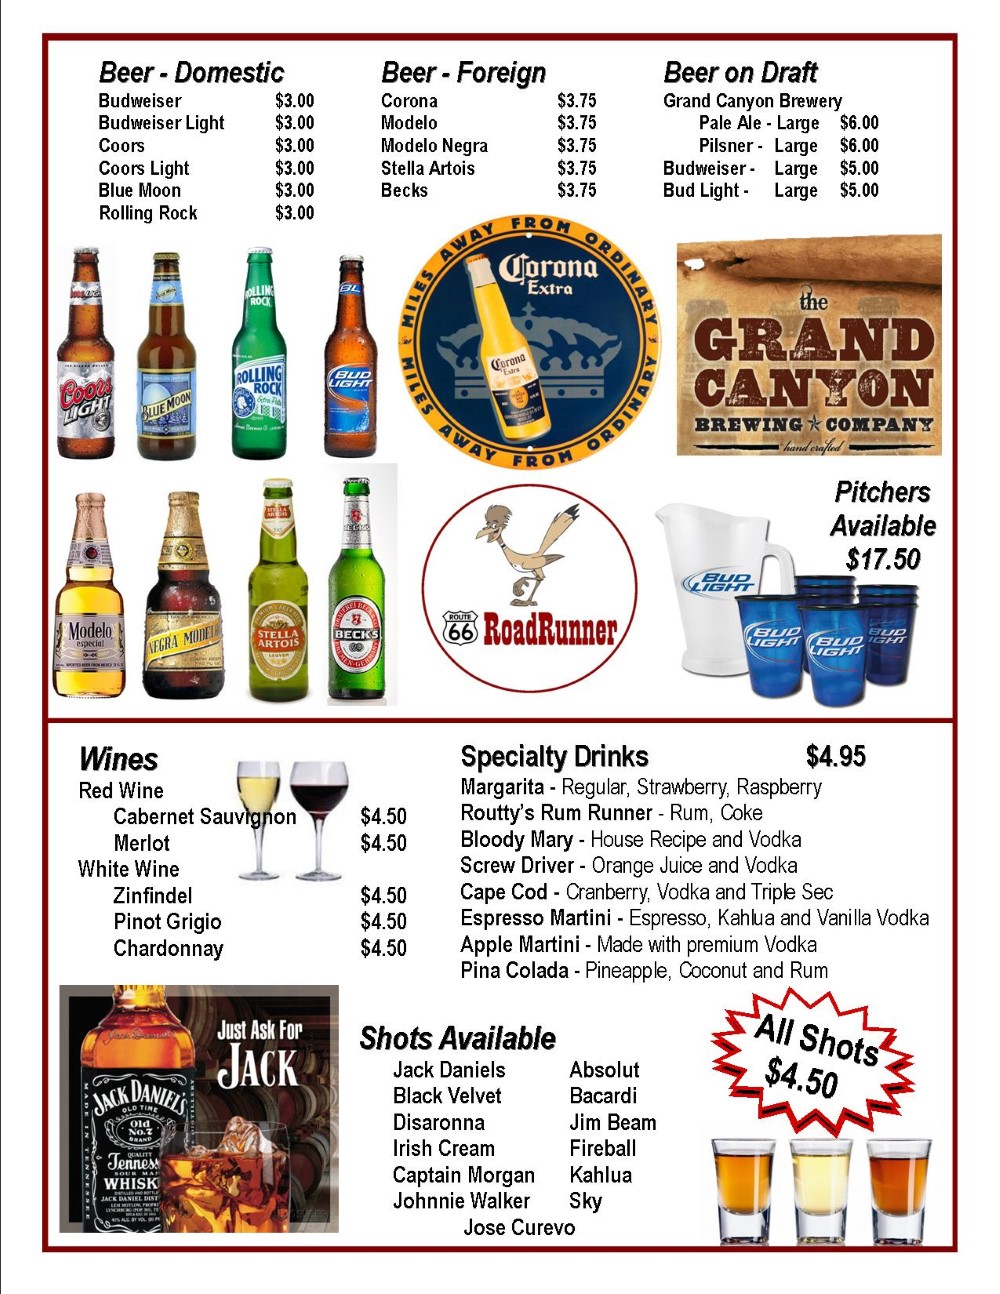 Have a Cold Beer on Route 66 | Stop by and have a cold beer or mixed drink at Route 66 Road Runner in Seligman Arizona.  Also enjoy a mixed drink on our outside patio or our indoor pub.